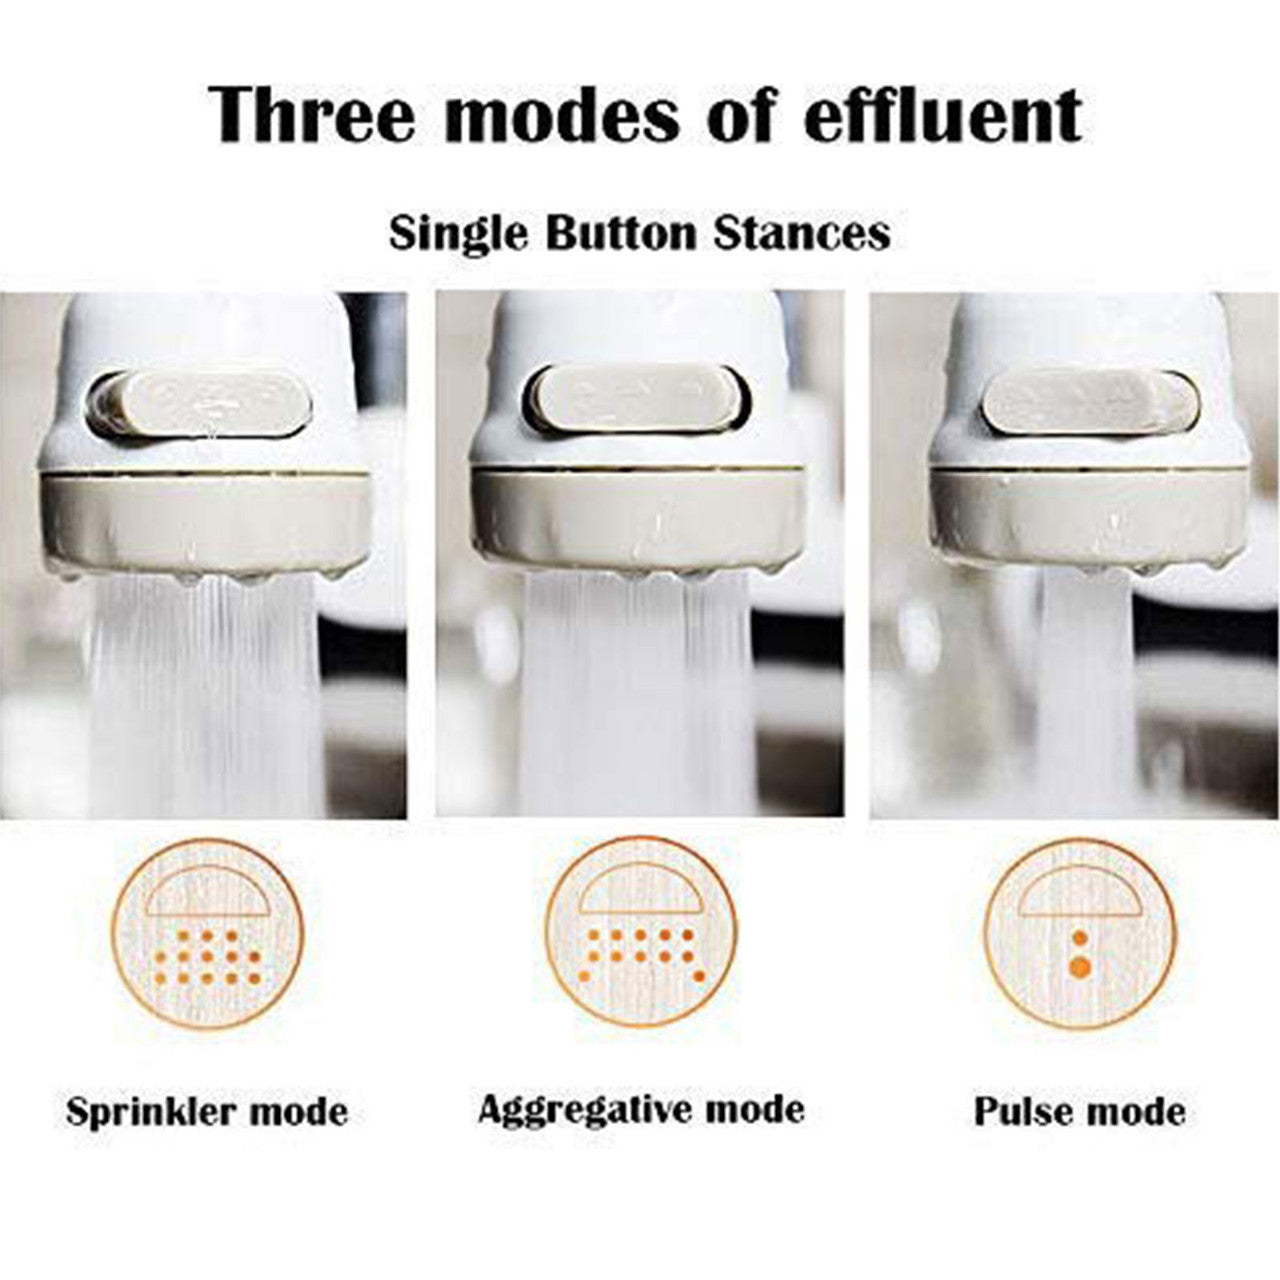 360 Degree Rotate Faucet Deluxe Internal Thread Nozzle Filter Adapter Water Saving Bubbler Connector Swivel Tap Aerator Diffuser Kitchen